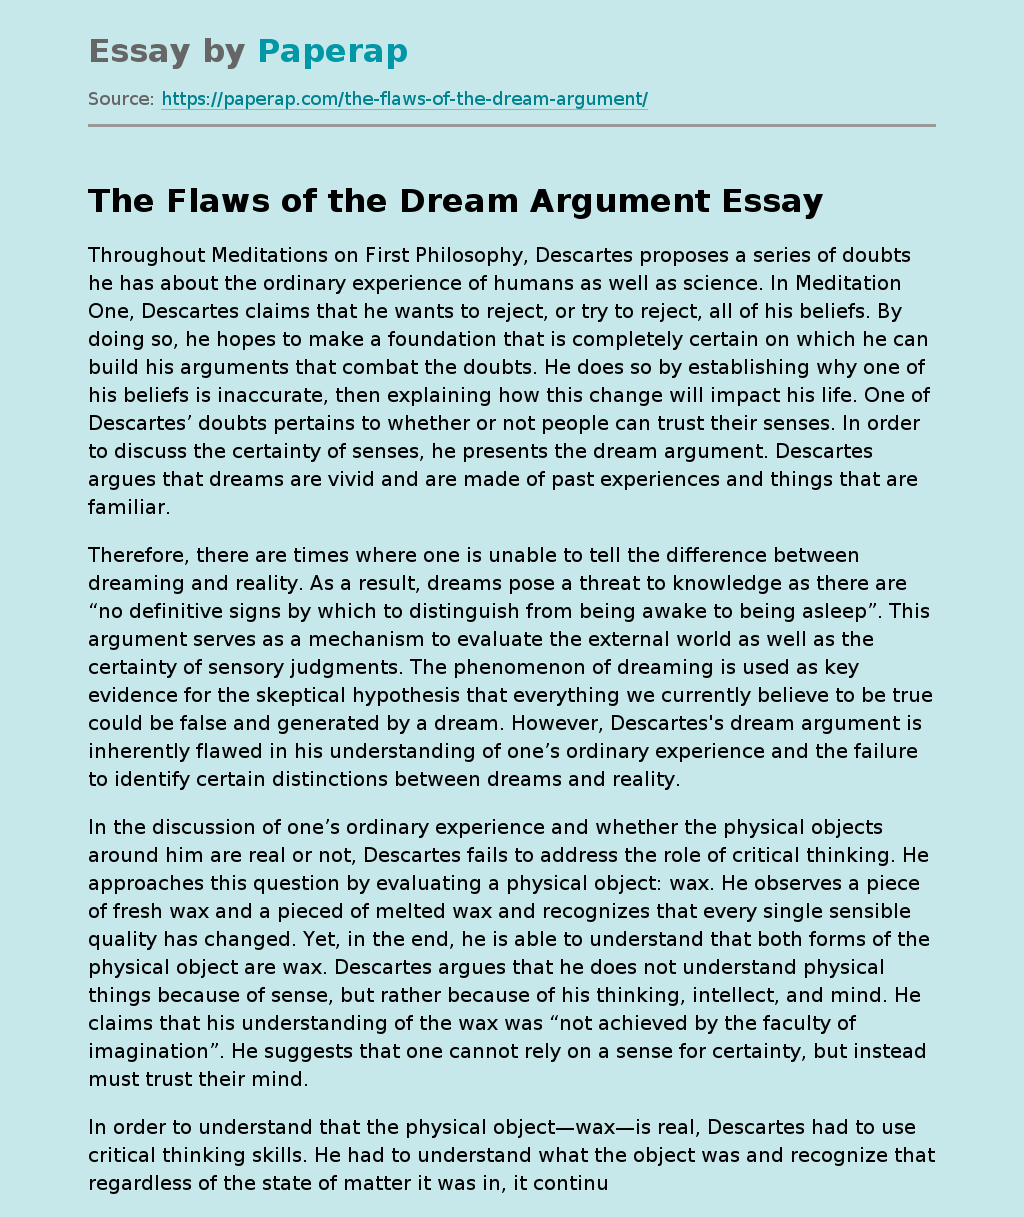 The Flaws of the Dream Argument